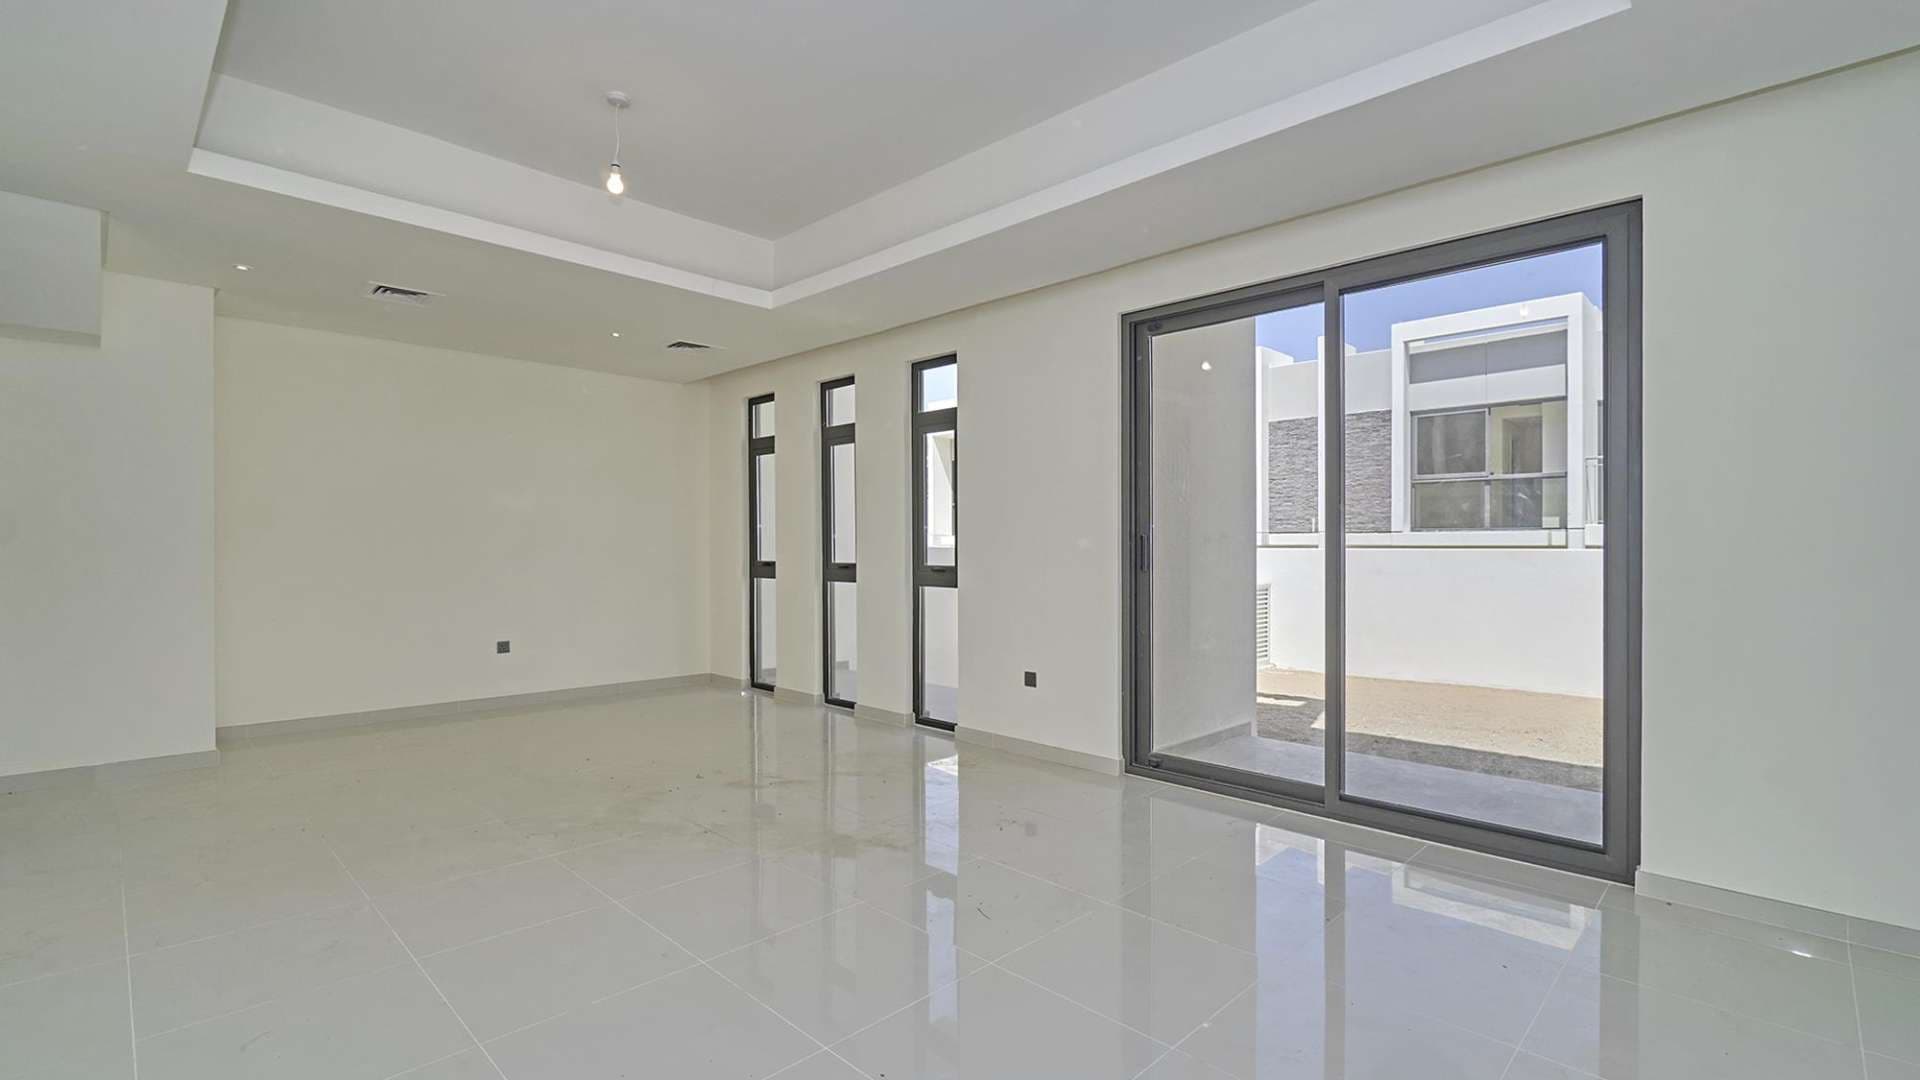 3 Bedroom Townhouse For Sale Claret Lp07880 22f5a4bc2b988800.jpg